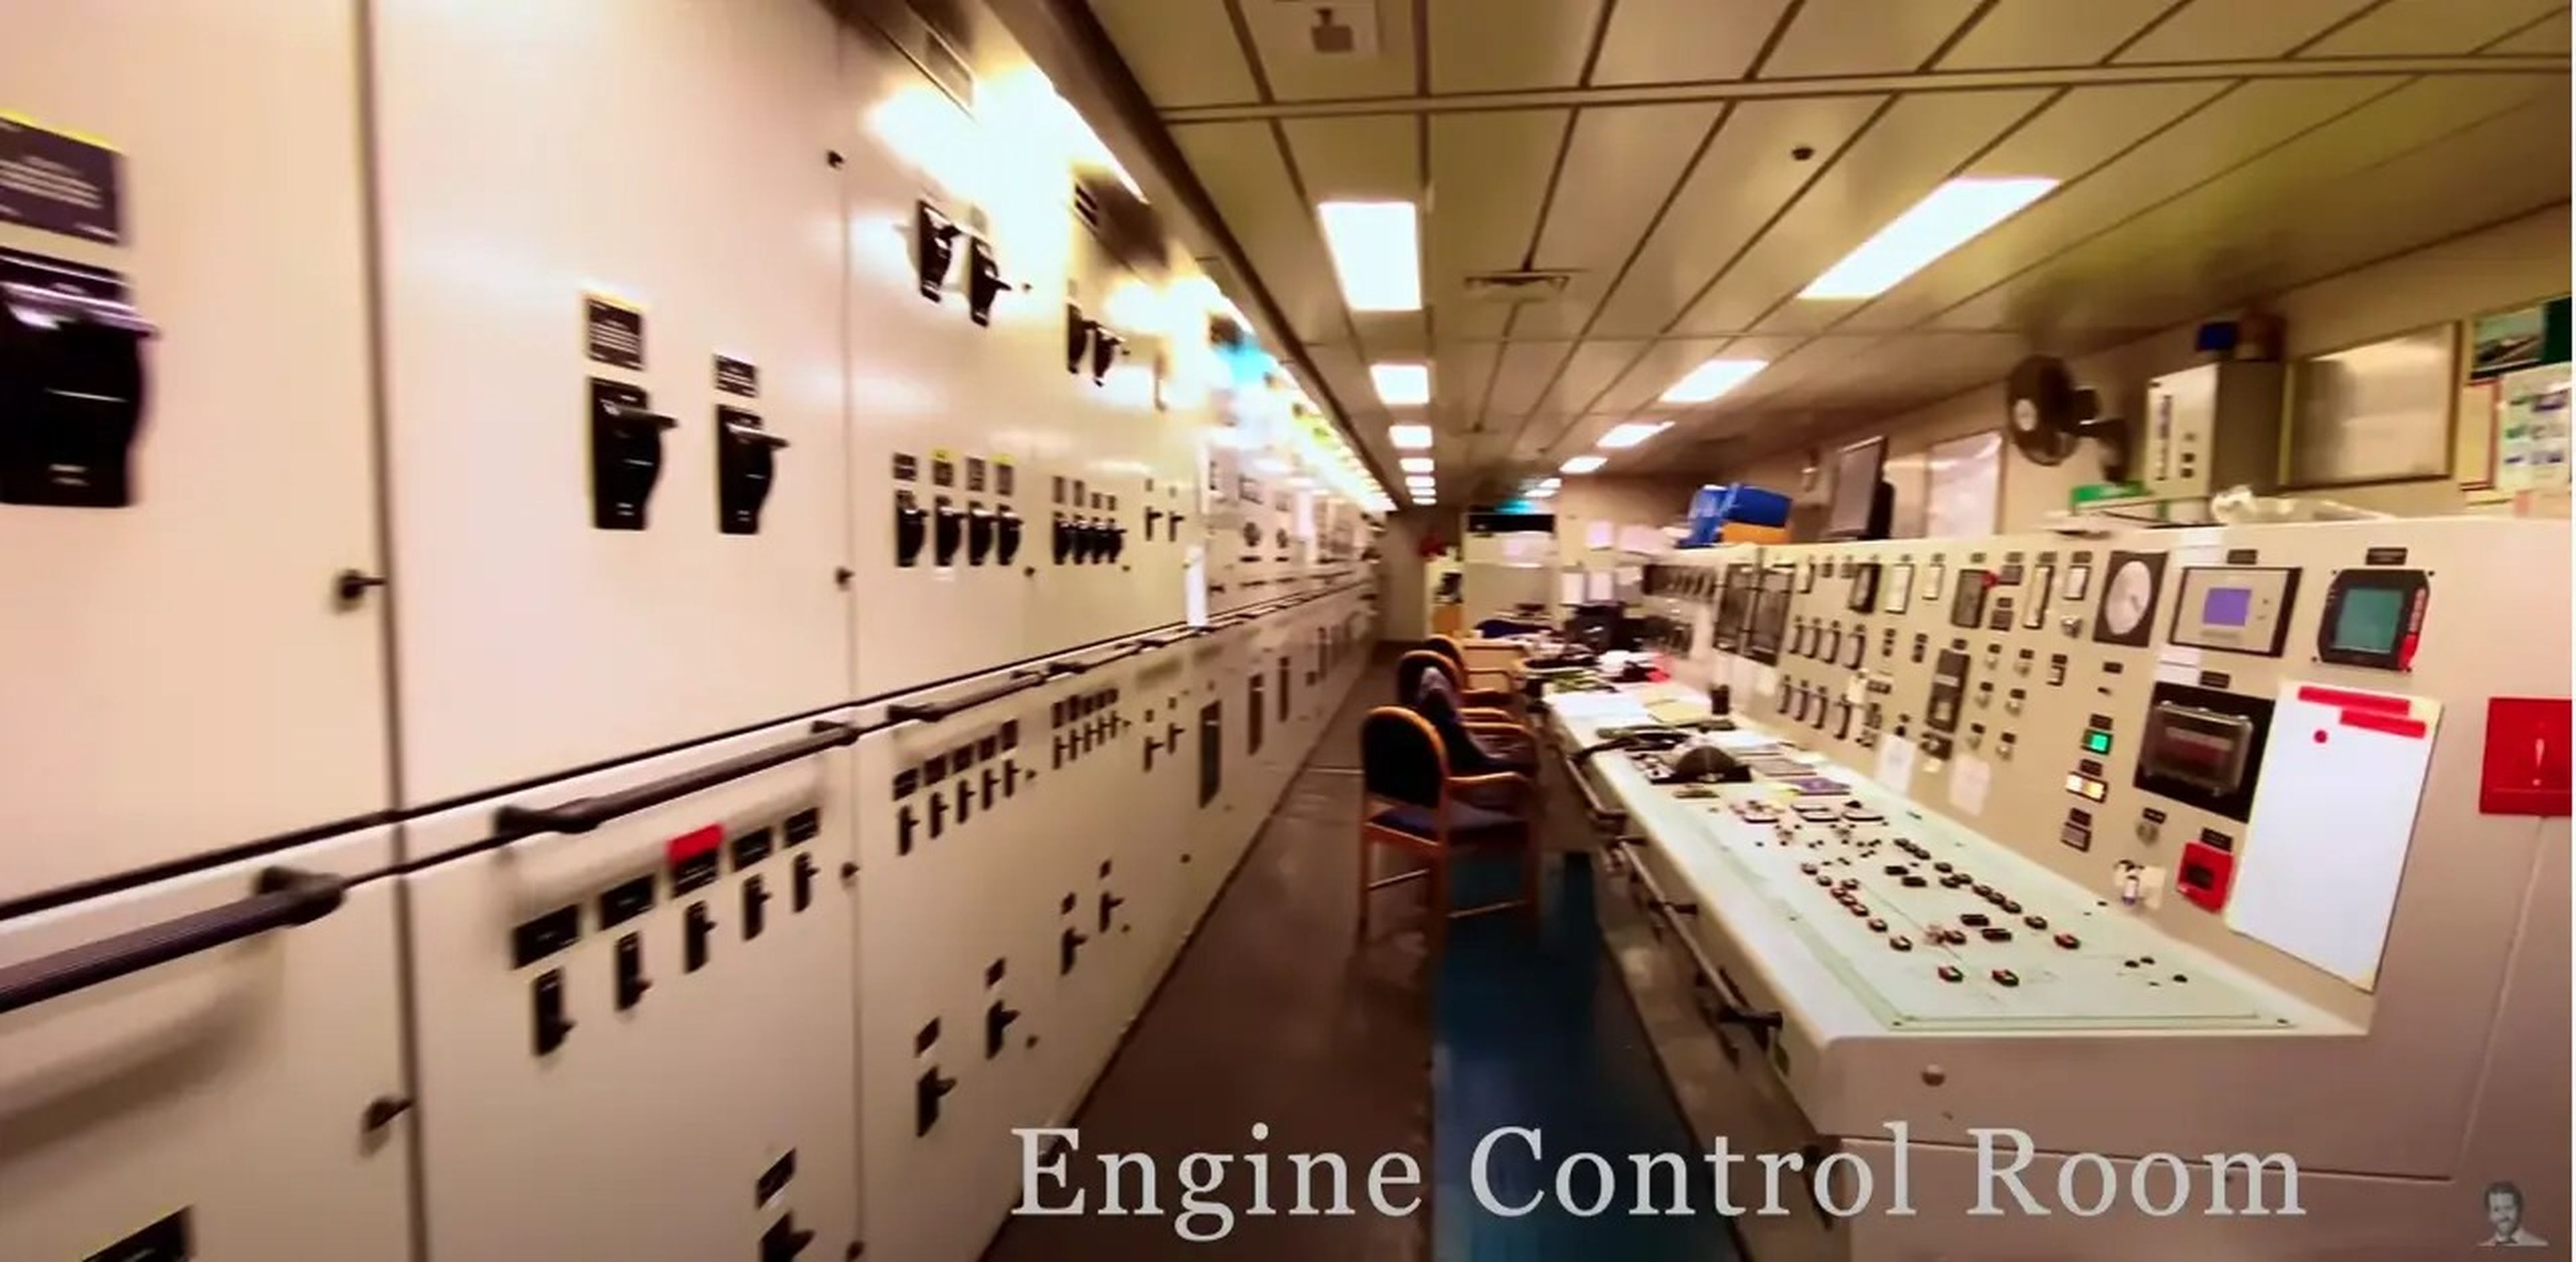 The engine control room